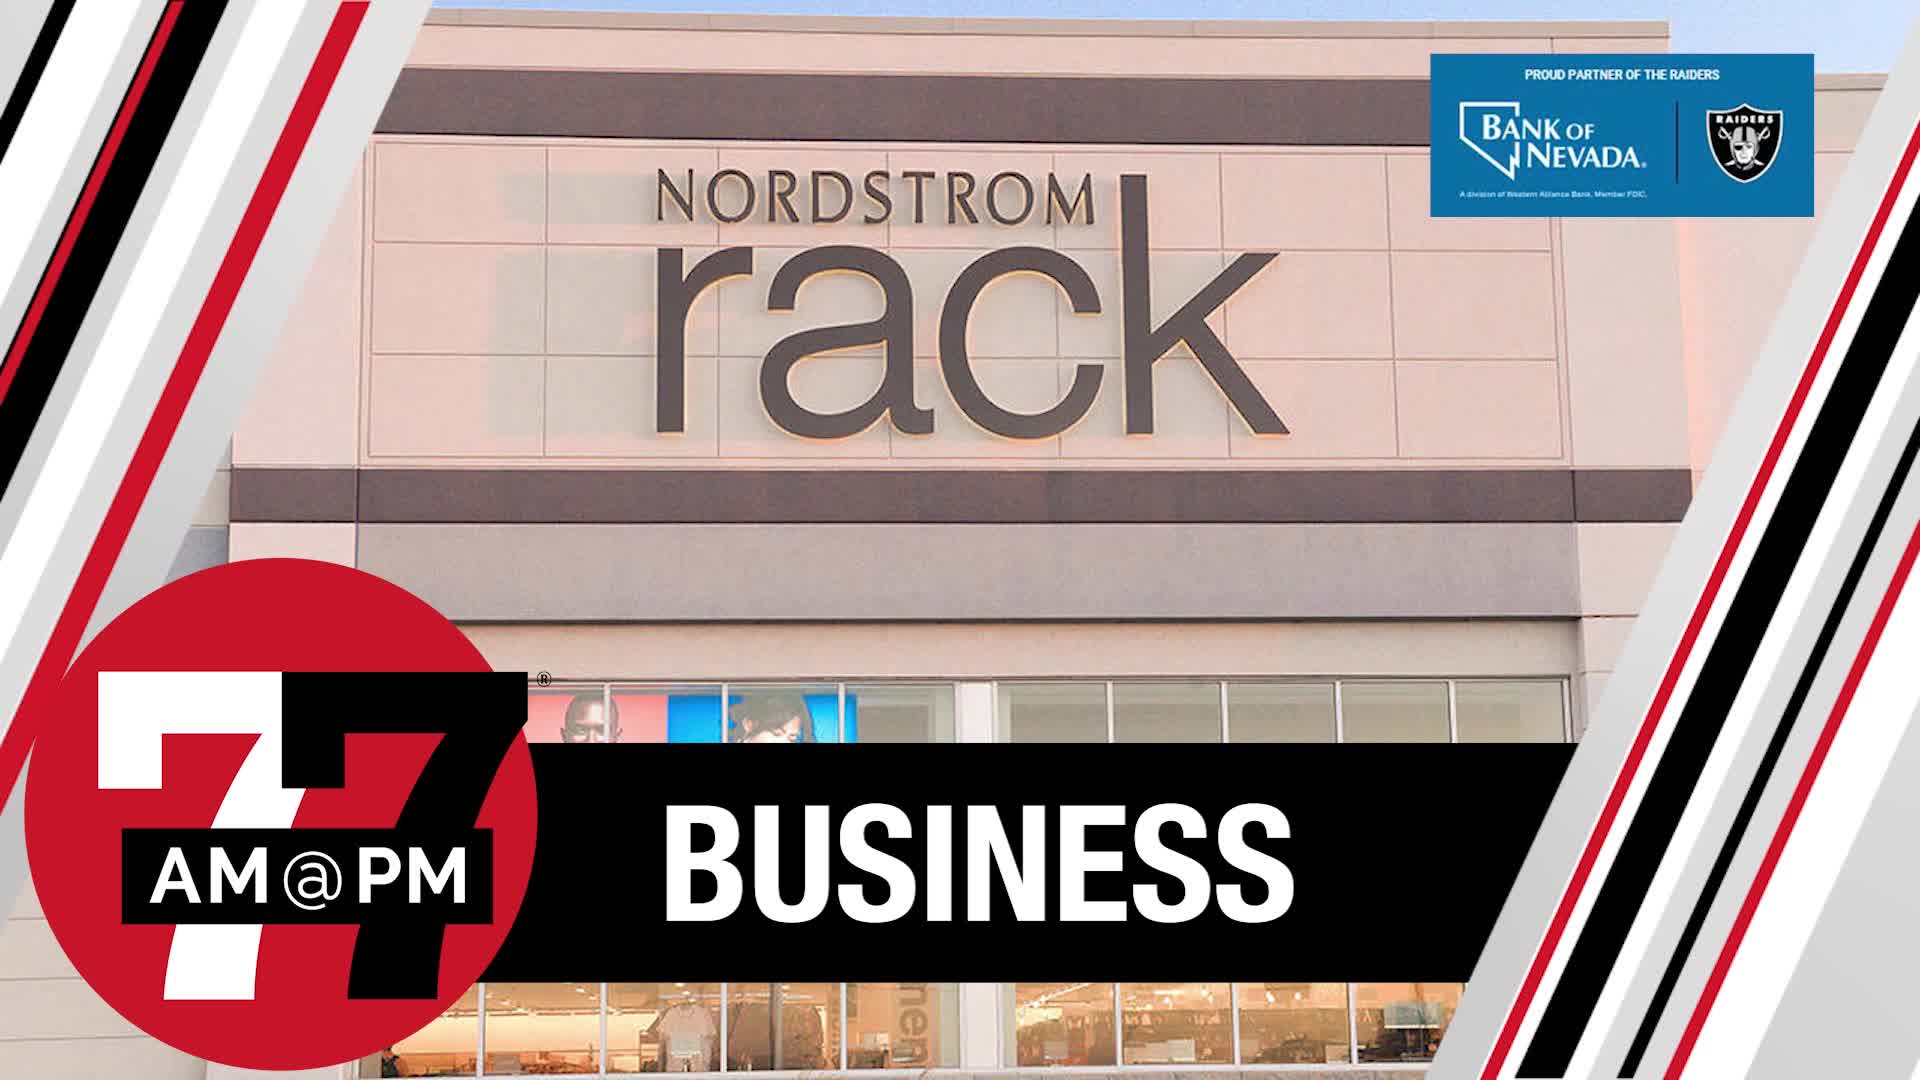 Nordstrom Rack to open another location